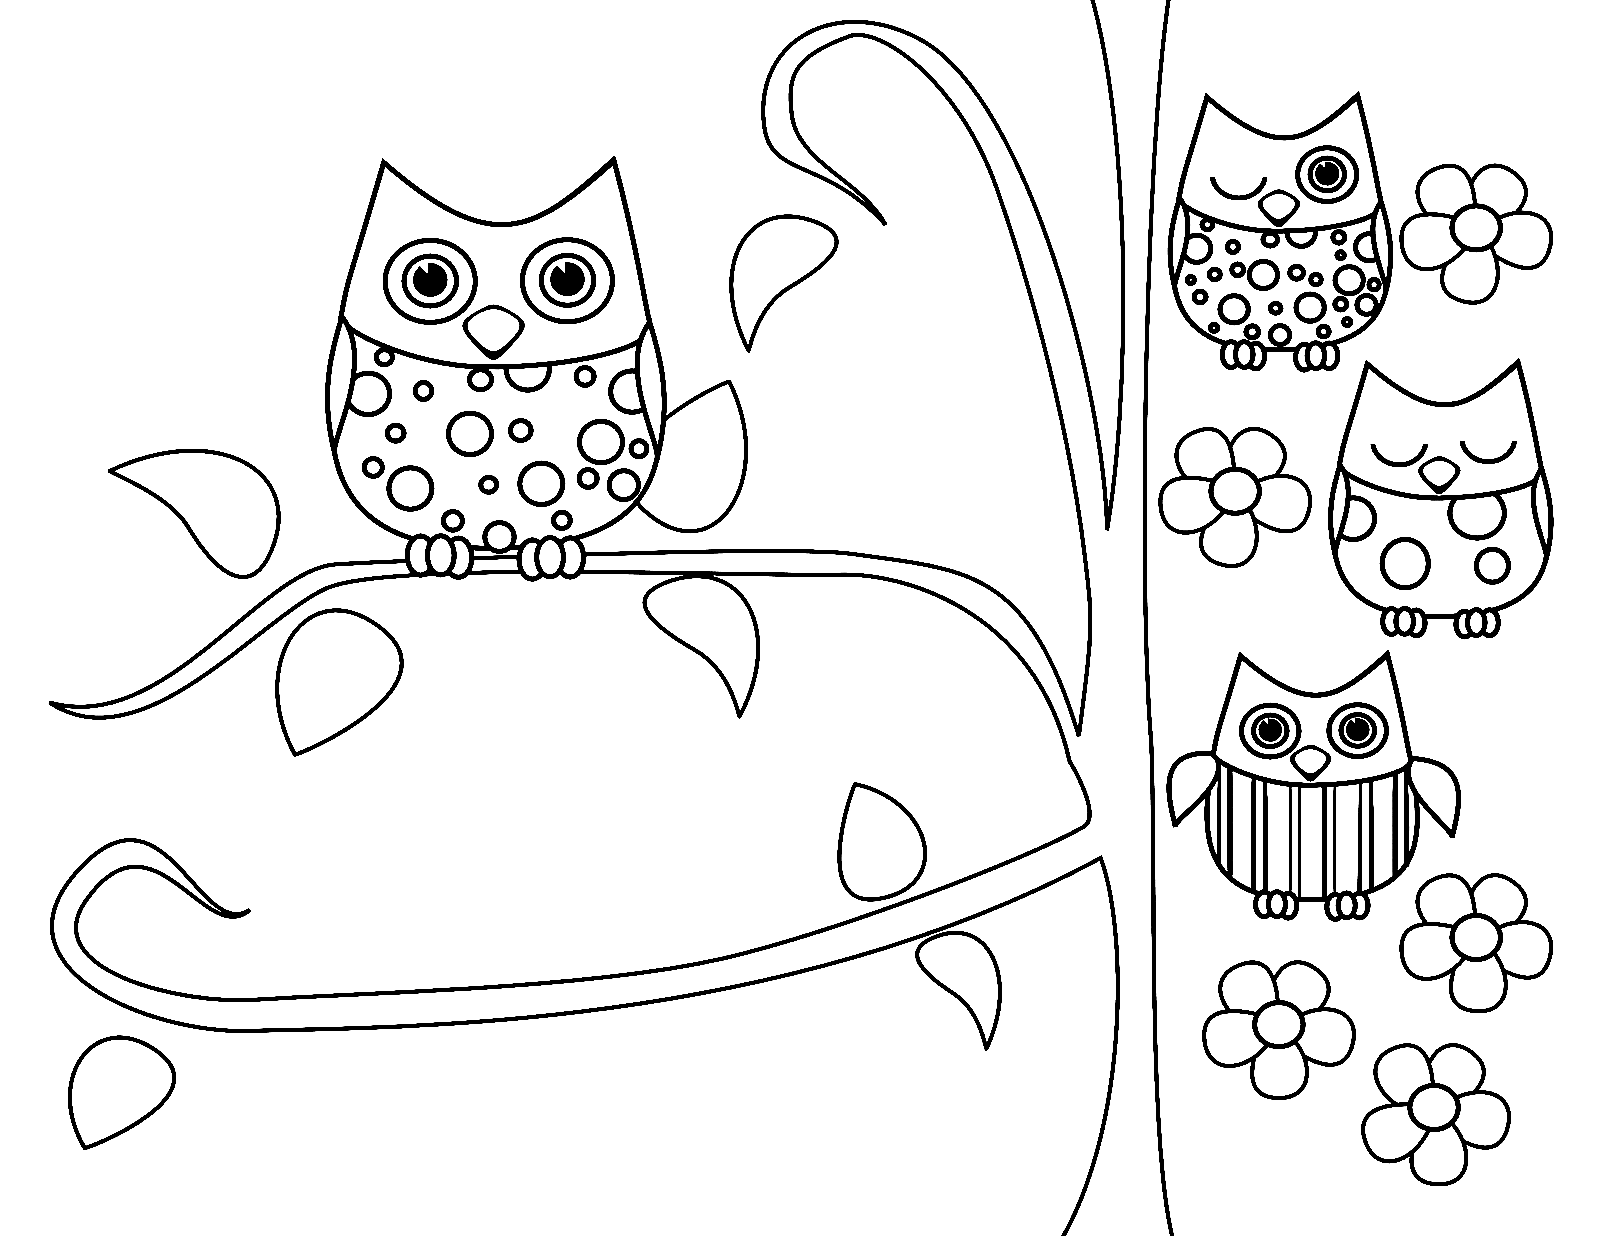 Fun Owls Coloring Page